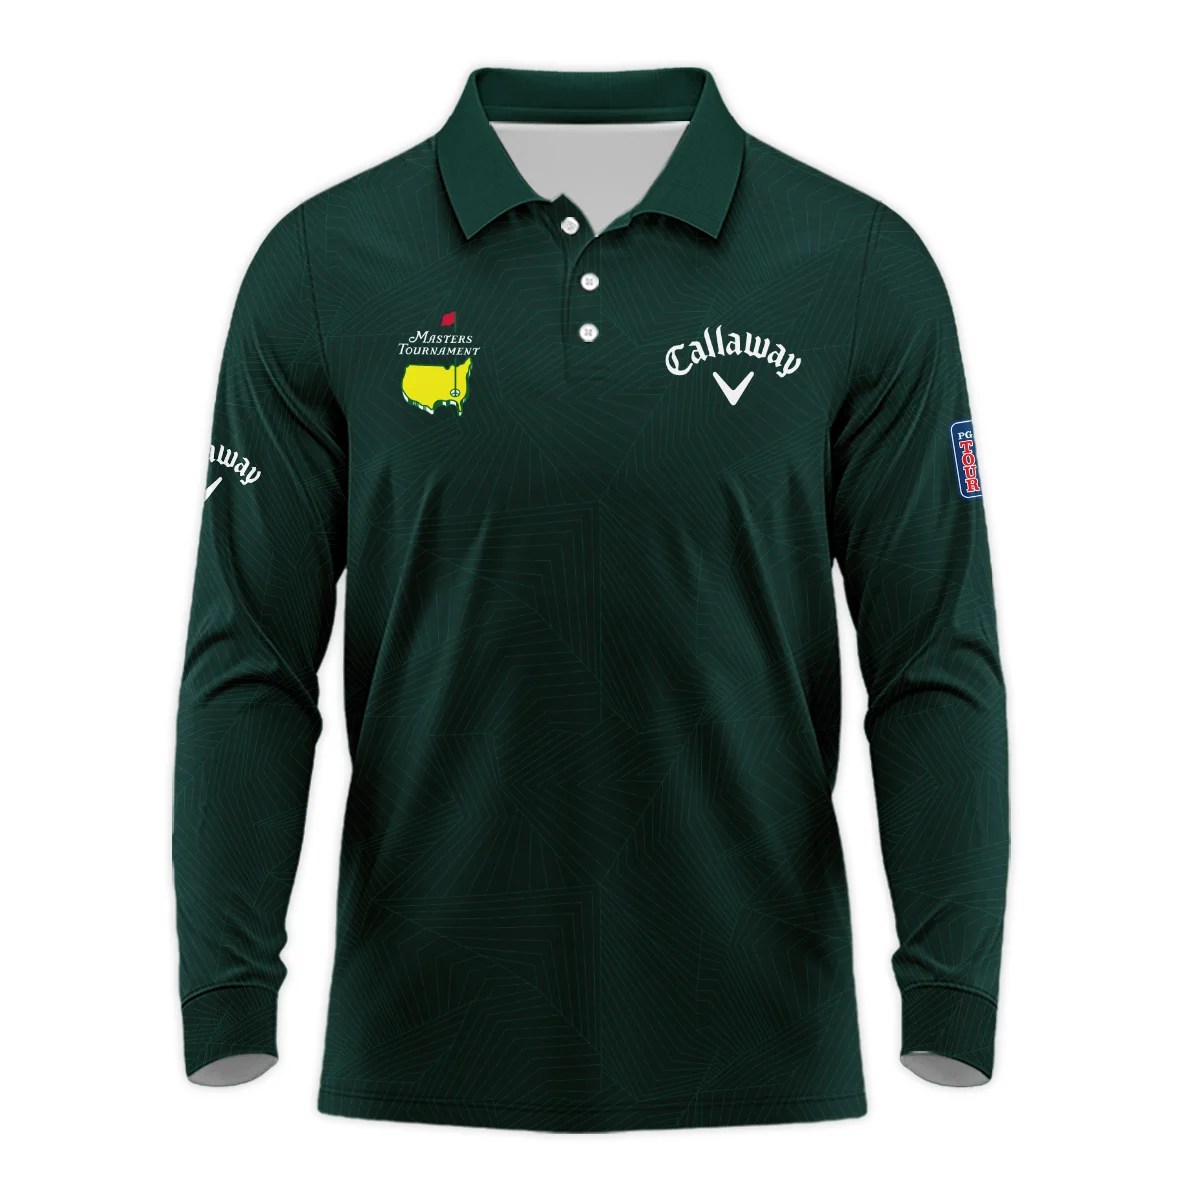 Masters Tournament Callaway Pattern Sport Jersey Dark Green Polo Shirt Style Classic Polo Shirt For Men